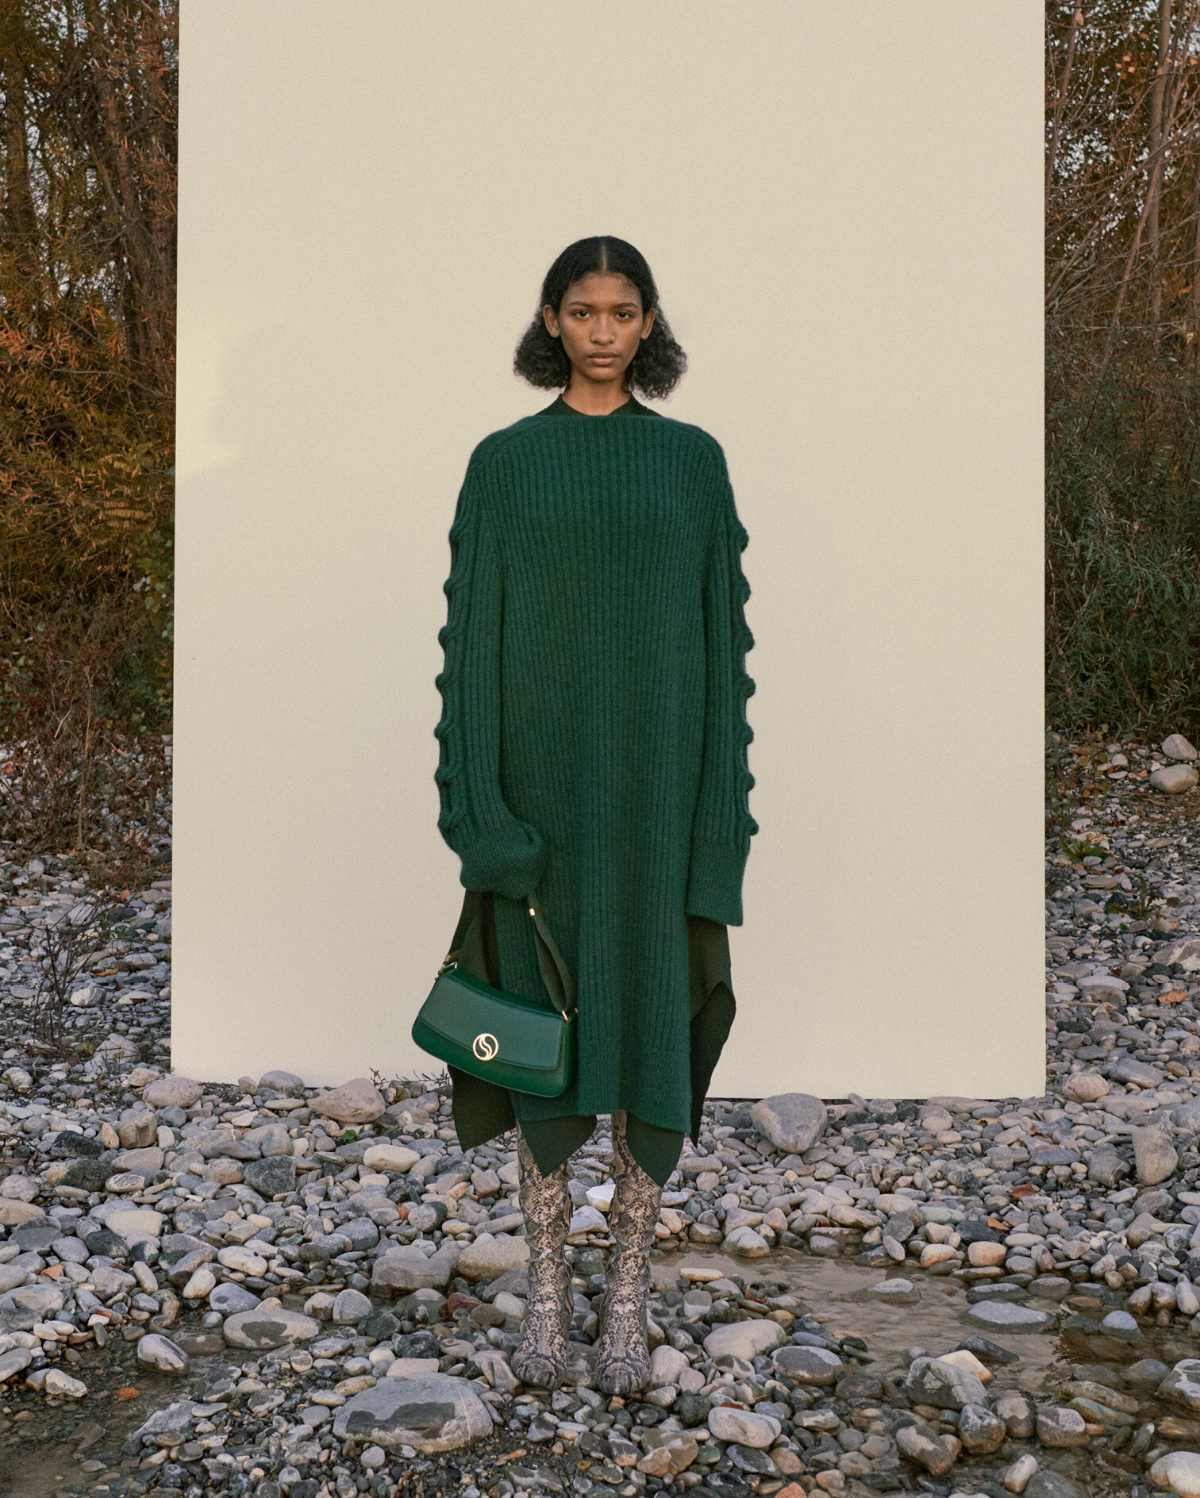 Stella McCartney Presents Her New Pre-Fall 2023 Collection